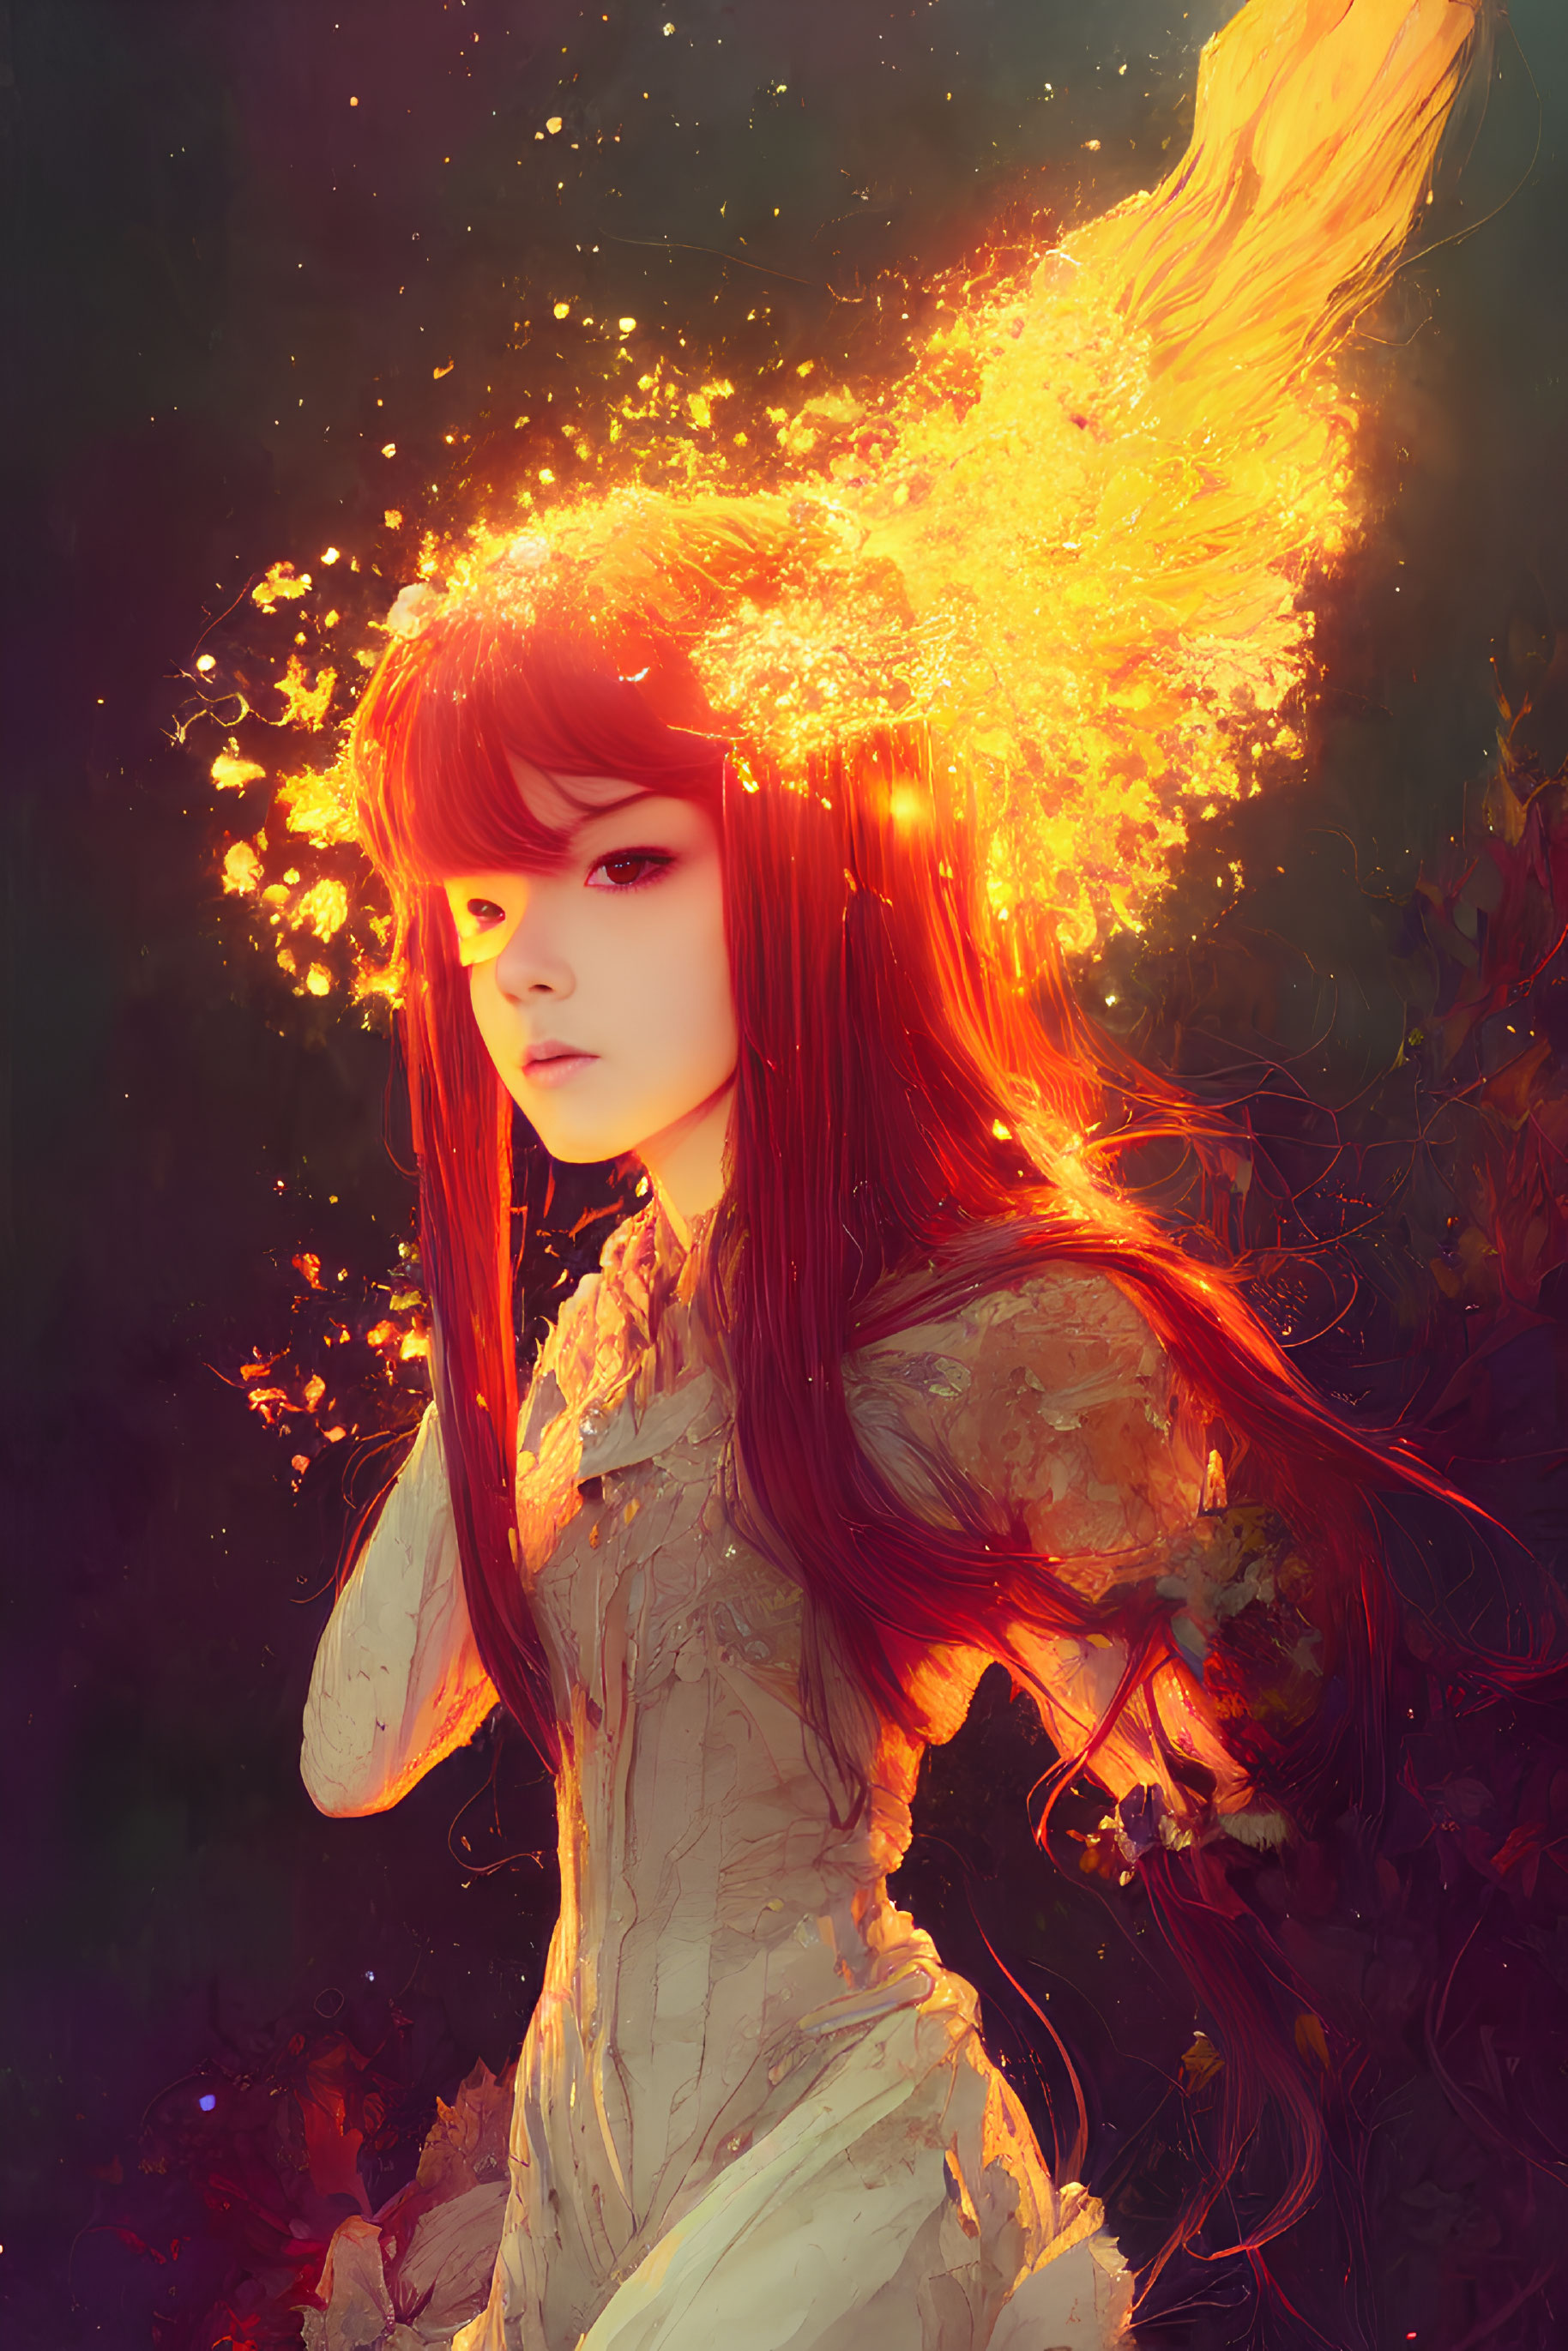 Digital illustration: Woman with fiery hair and glowing embers on dark background